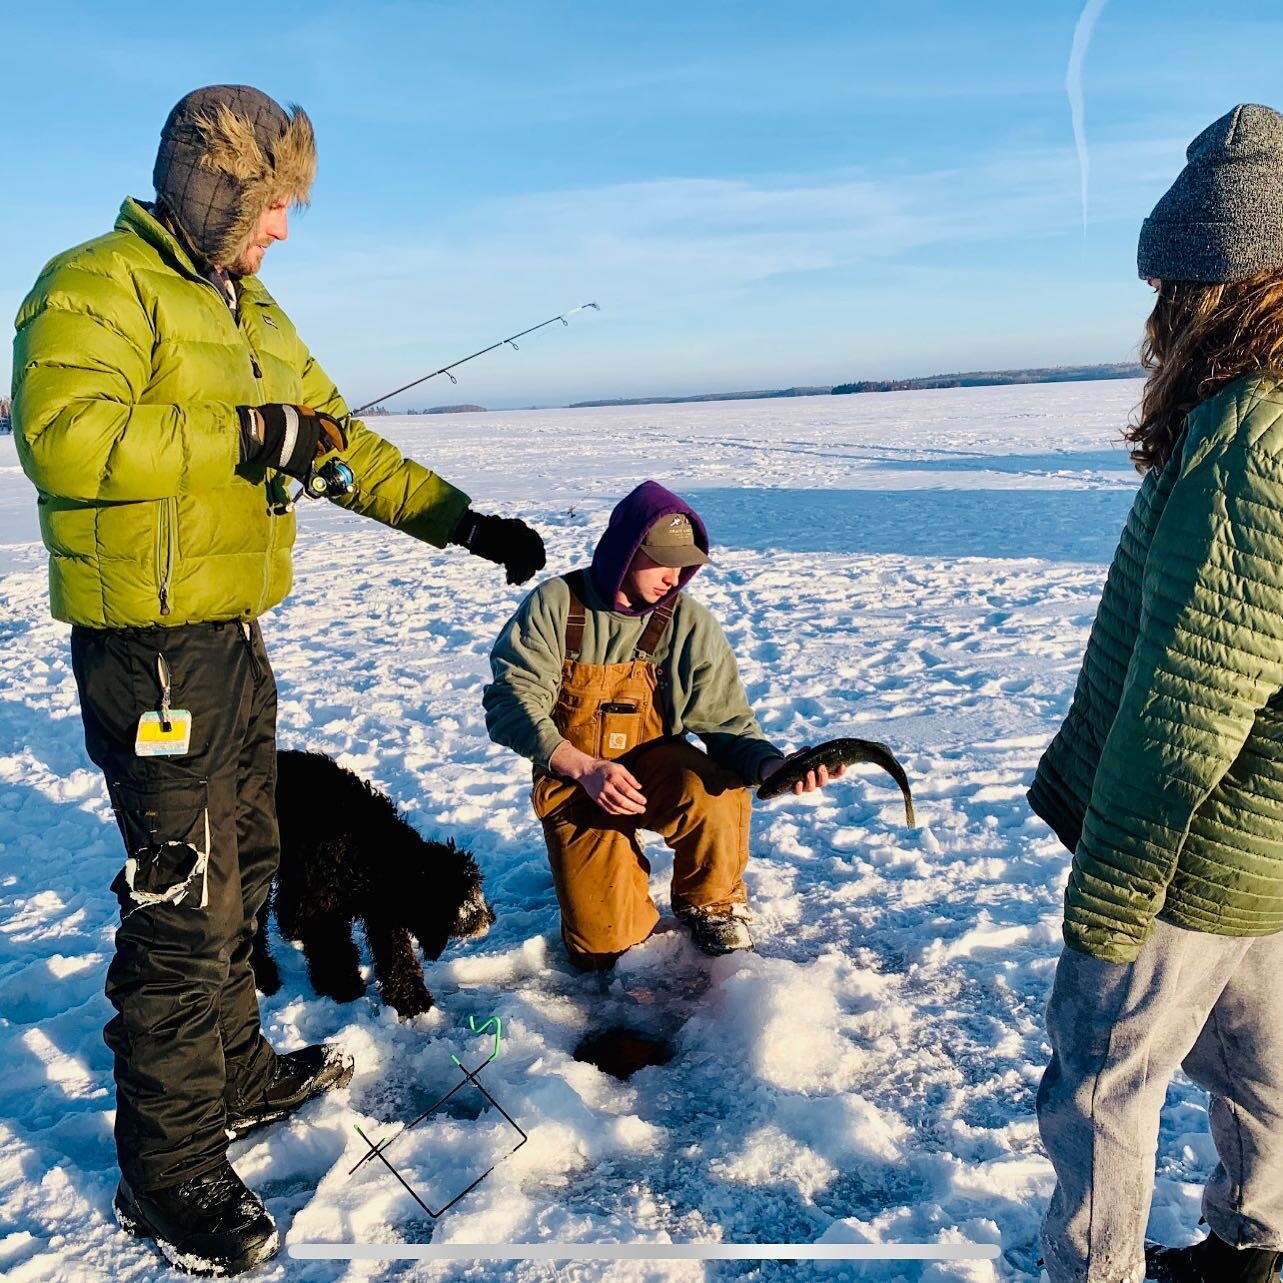 You can fish inside by the fire or outside in the elements! 

We have 8 holes drilled inside our climate controlled ice resorts but sometimes it&rsquo;s nice to get our and enjoy the beautiful winter sunshine ☀️🎣 

We can&rsquo;t wait to see you on 